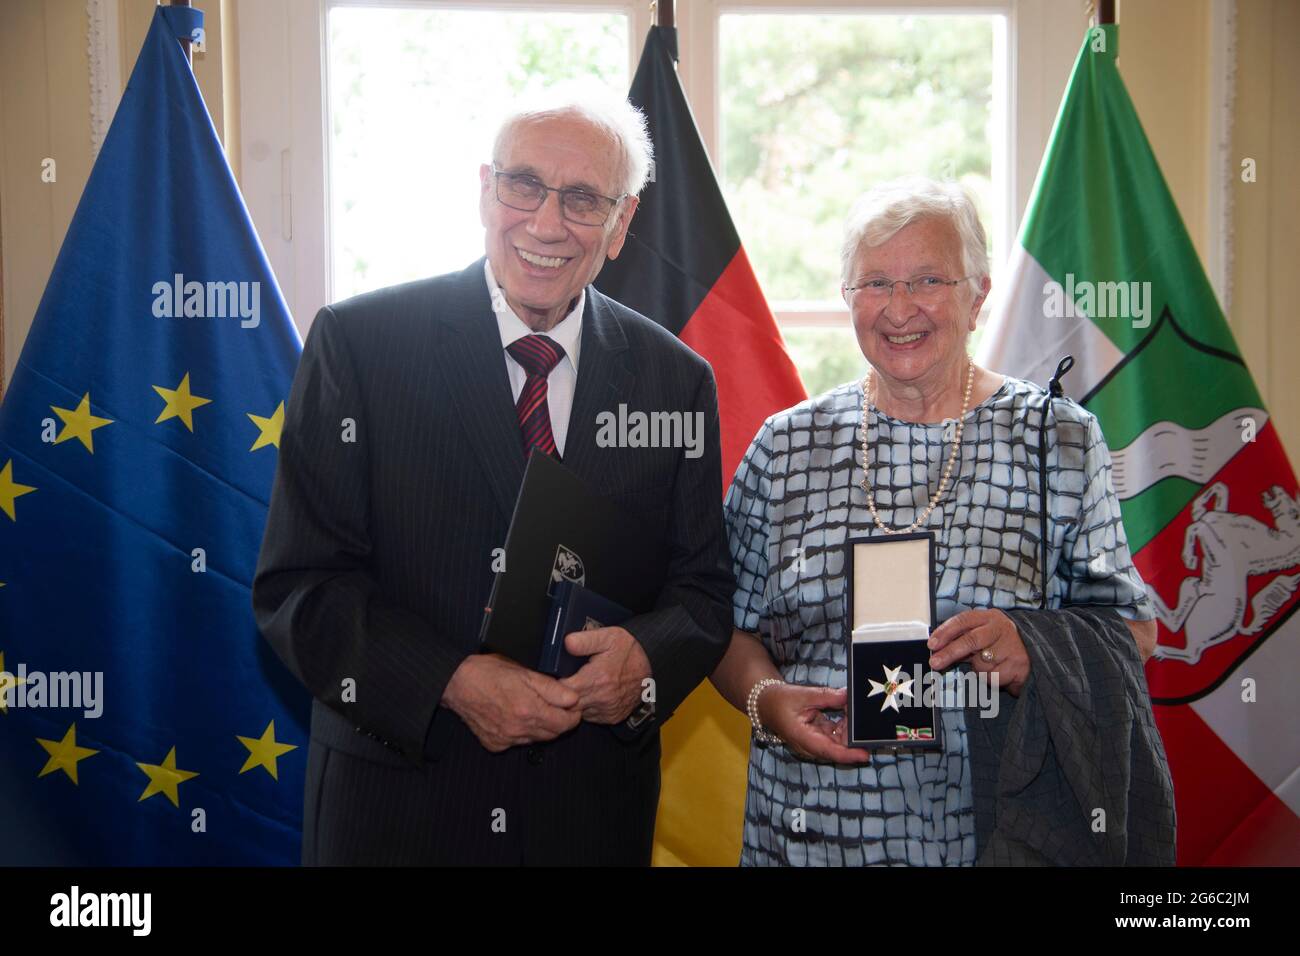 Duesseldorf, Deutschland. 28th June, 2021. The couple Ursula and Heribert HOELZ, HÃ¶lz, with their Order of Merit, Prime Minister Armin Laschet honors citizens of North Rhine-Westphalia for their exceptional commitment to society with the Order of Merit of the State, award of the Order of Merit of the State of North Rhine-Westphalia in Duesseldorf on 06/28/2021 ÃÂ Credit: dpa/Alamy Live News Stock Photo